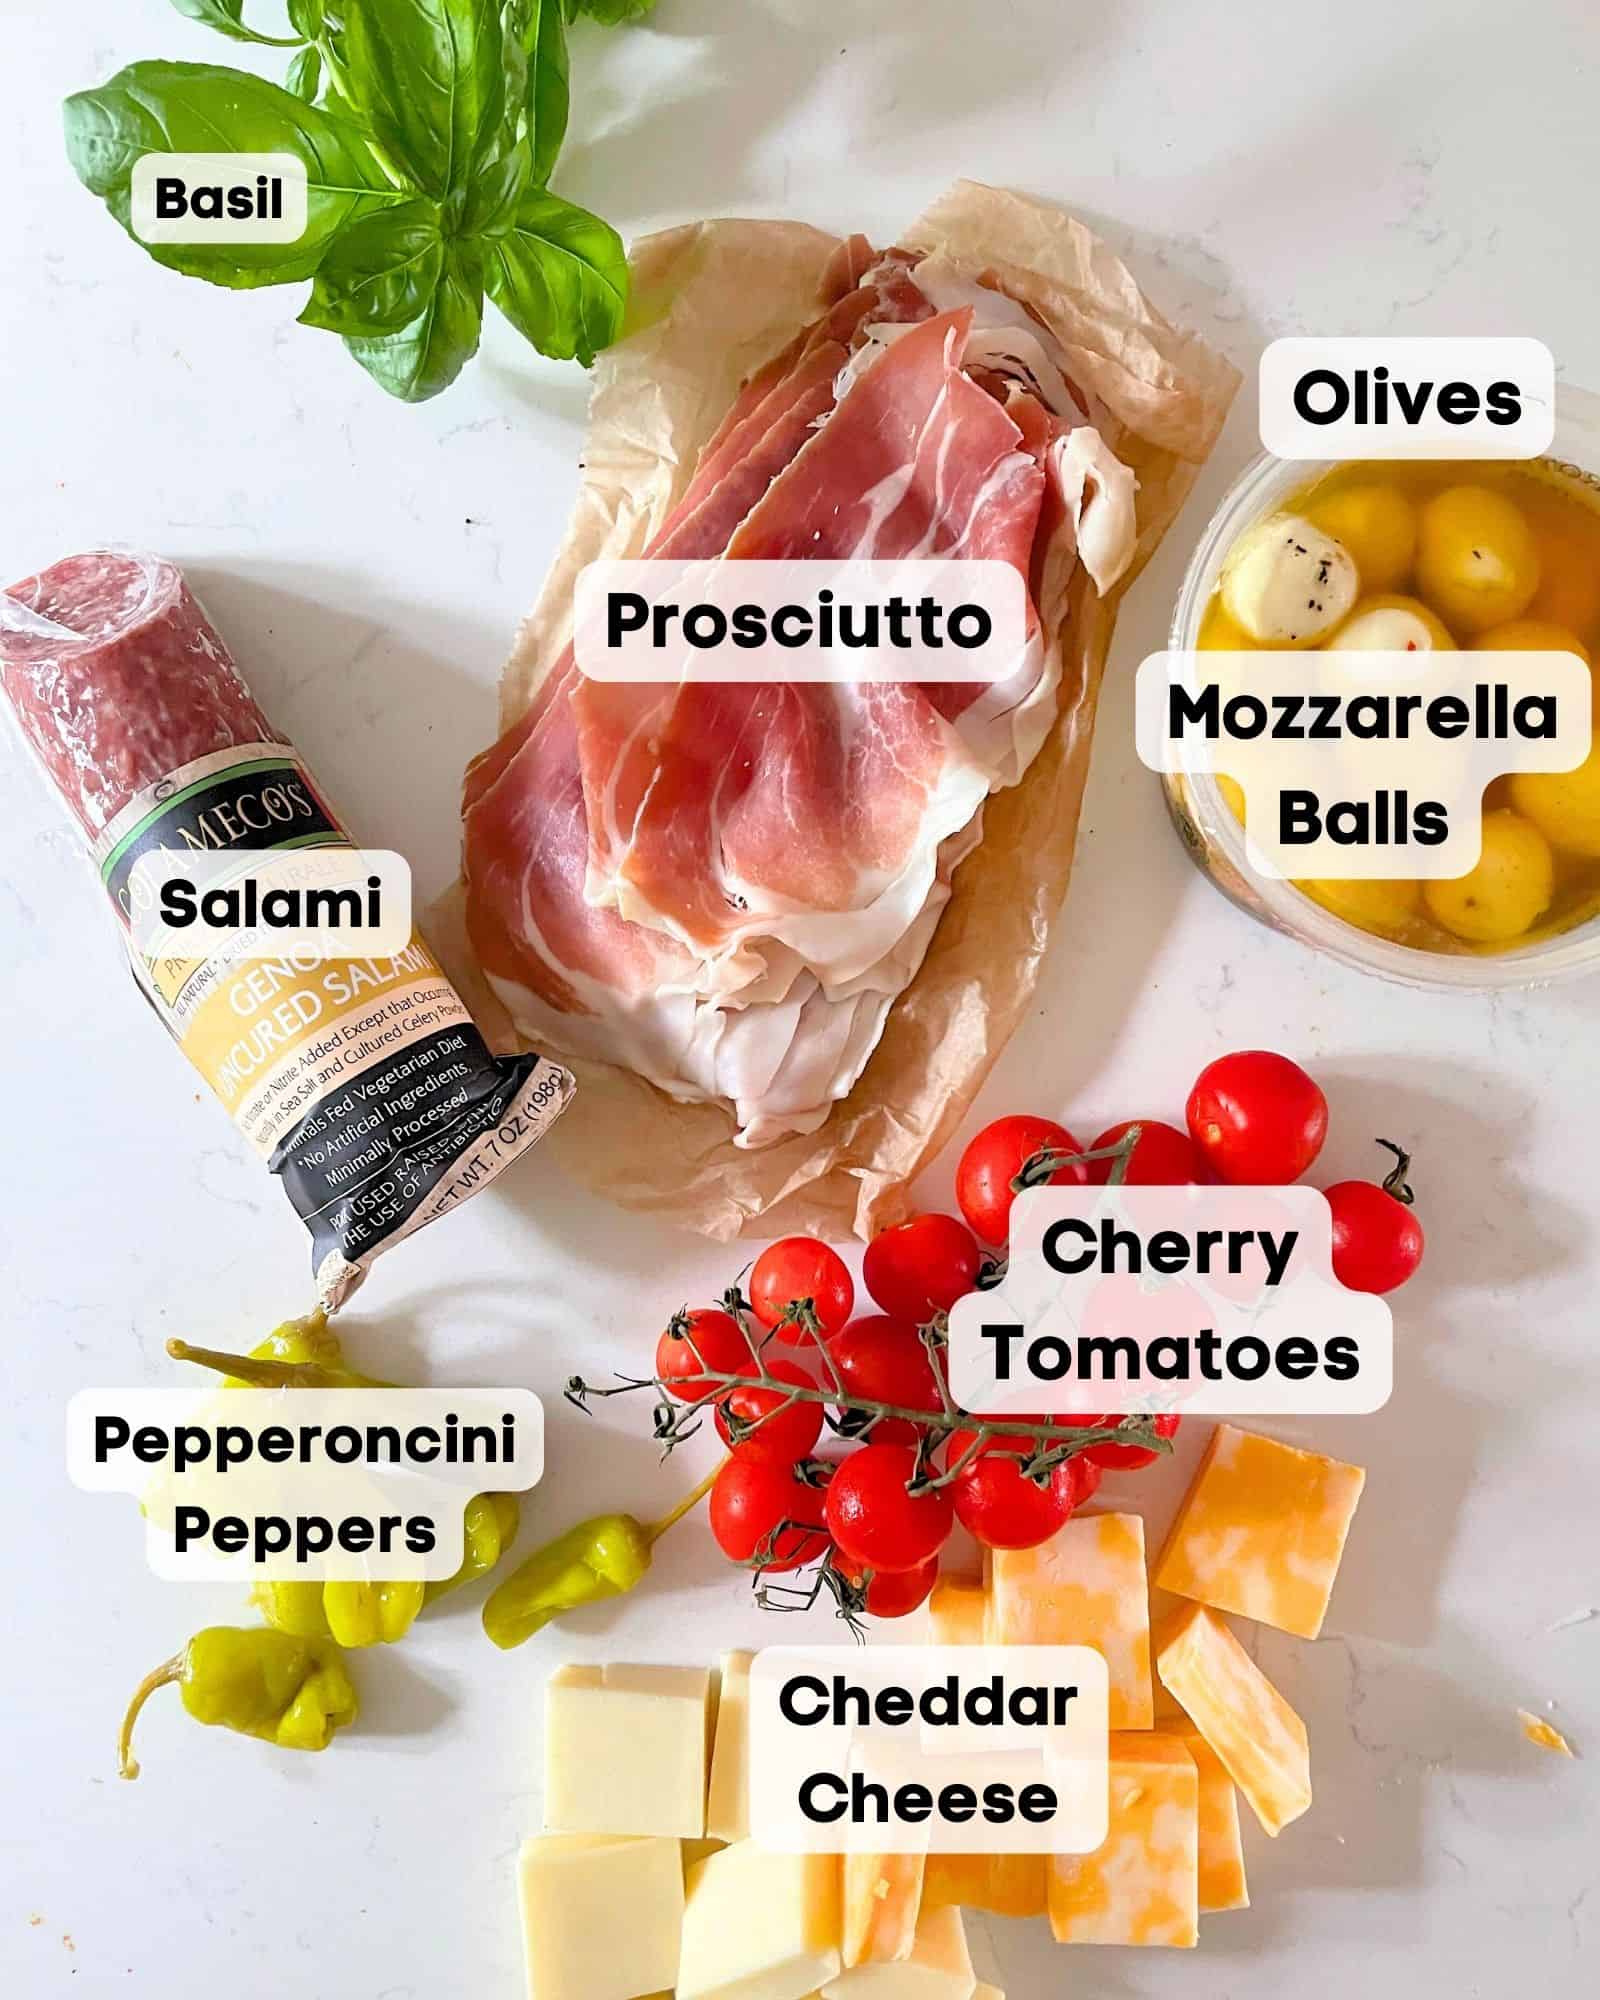 ingredients to make charcuterie skewers - prosciutto, cheddar cheese, basil, pepperoncini peppers, salami, cherry tomatoes, olives, mozzarella balls.